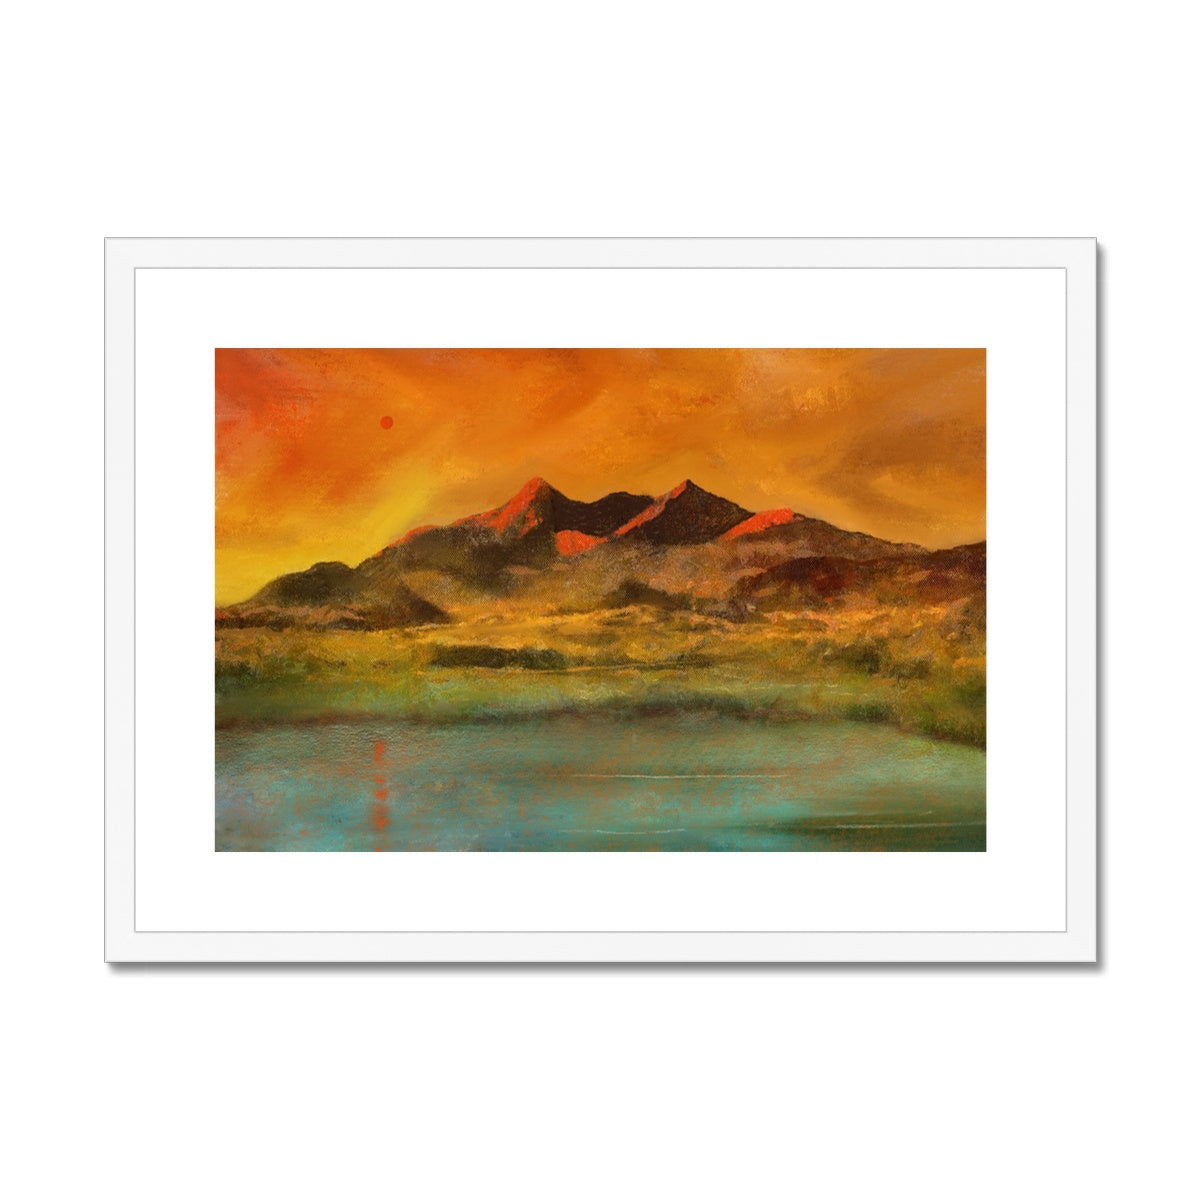 Skye Red Moon Cuillin Painting | Framed & Mounted Prints From Scotland-Framed & Mounted Prints-Skye Art Gallery-A2 Landscape-White Frame-Paintings, Prints, Homeware, Art Gifts From Scotland By Scottish Artist Kevin Hunter